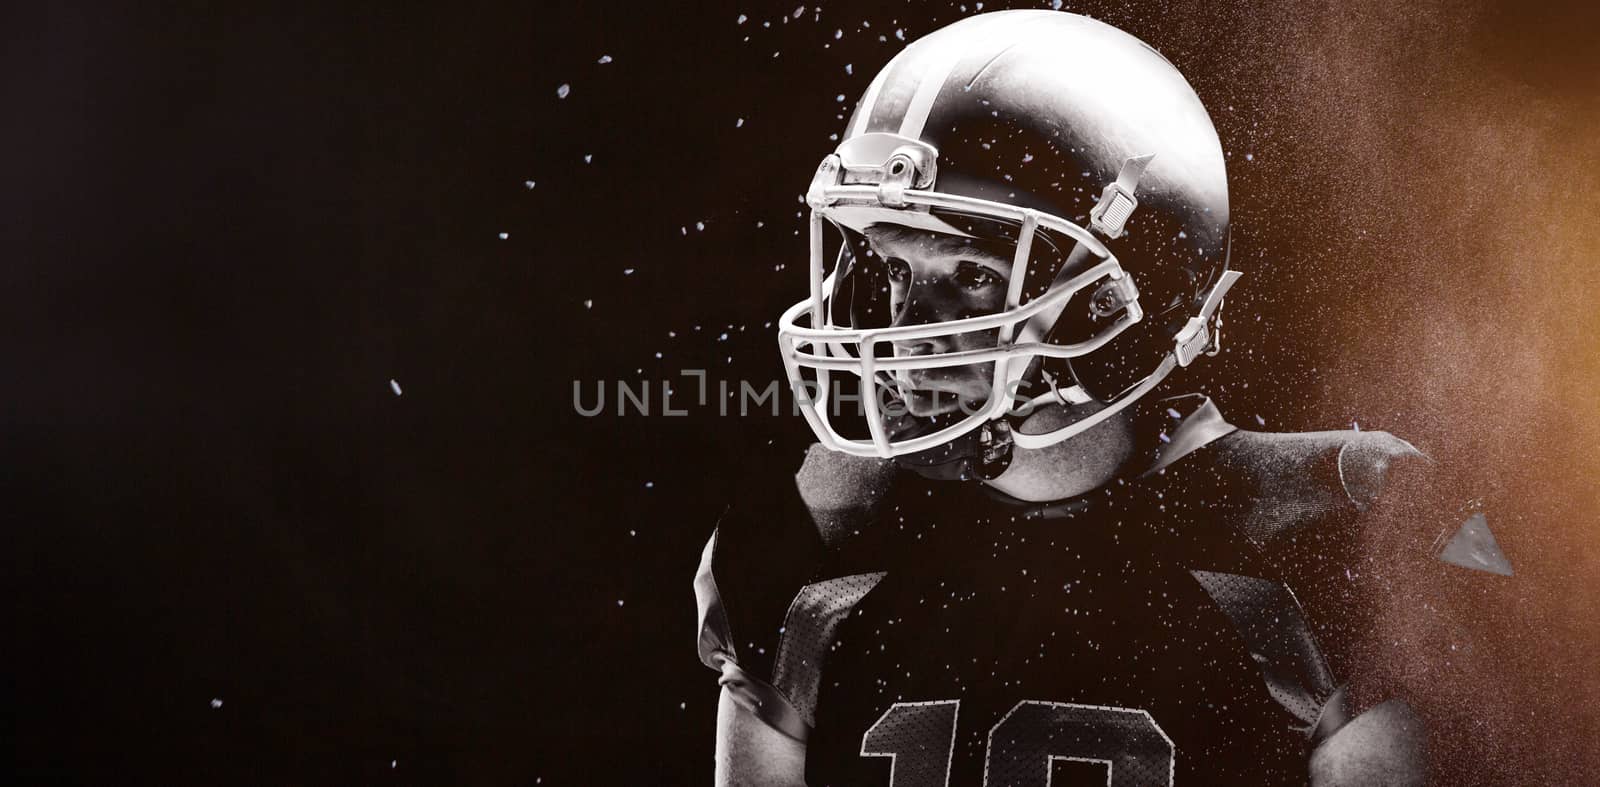 Digitally generated image of powder against american football player standing with rugby helmet